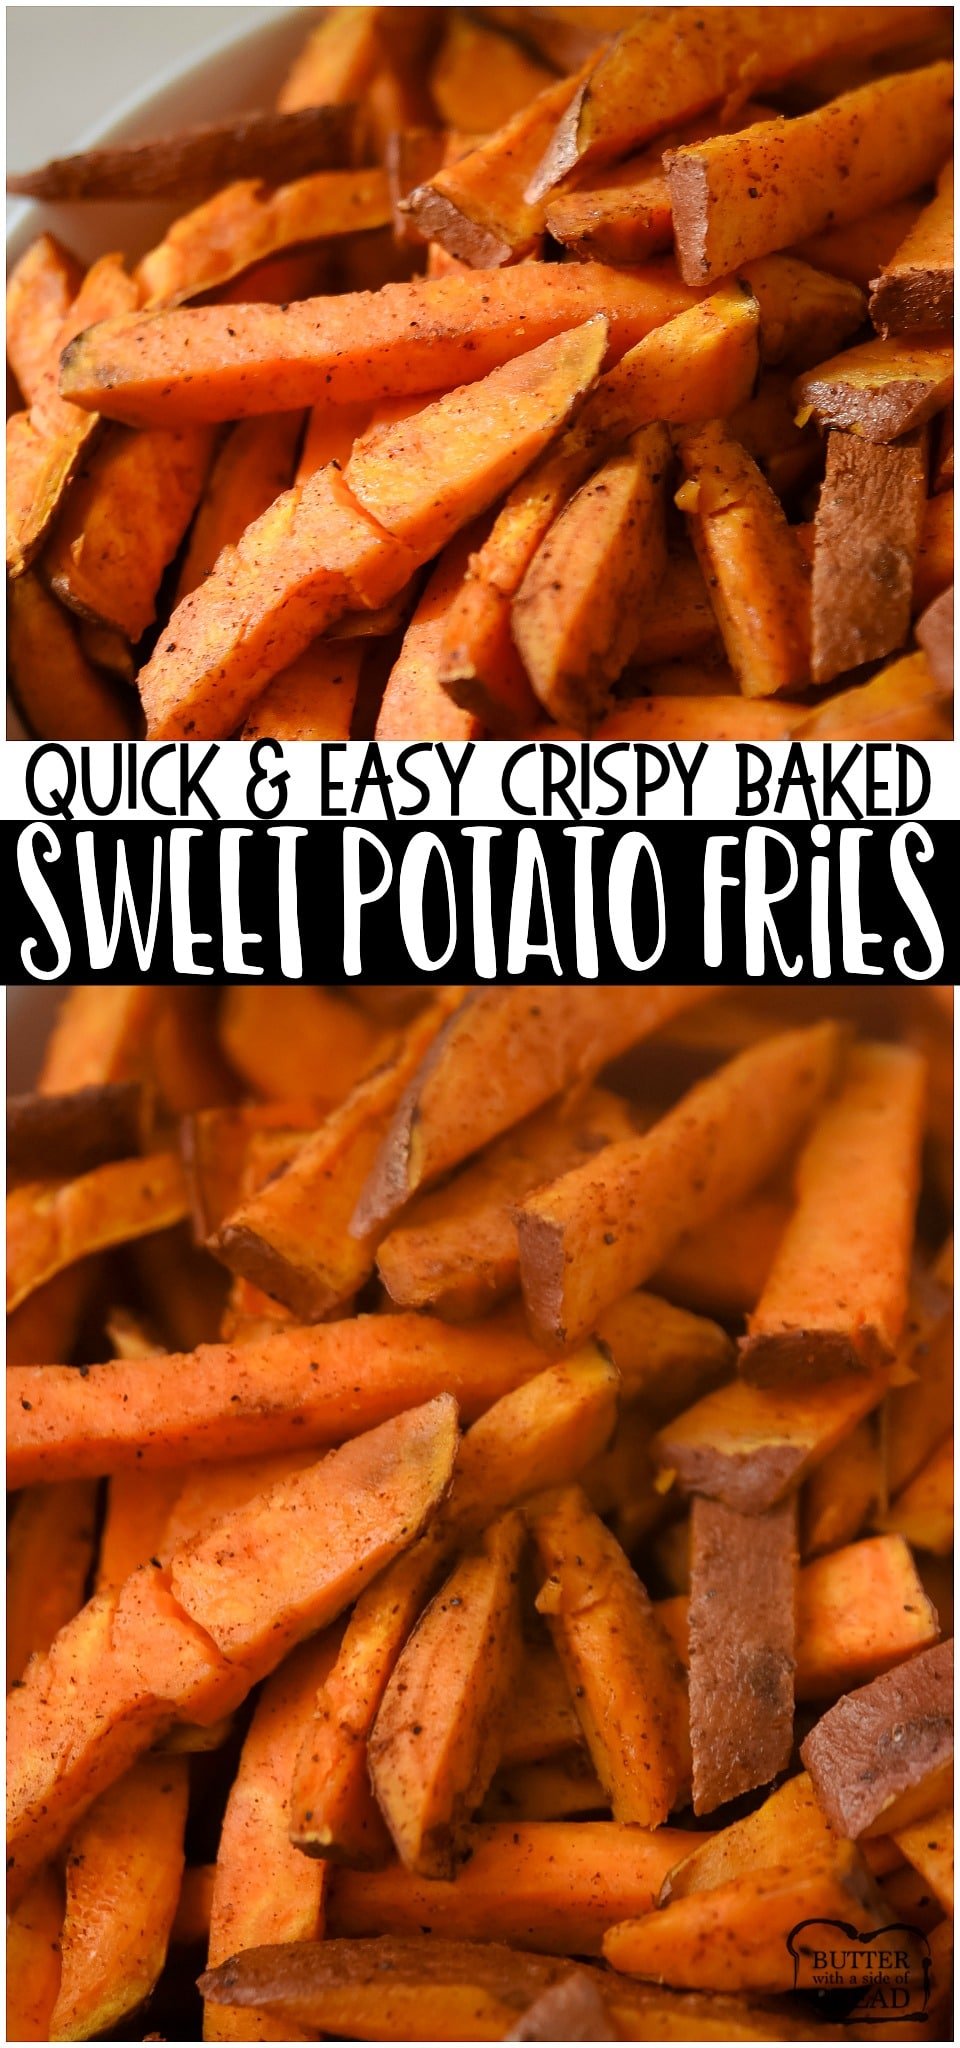 Homemade Sweet Potato Fries are so easy to make and taste delicious. Baked Fries are ultra-crispy, easy to make, perfectly seasoned and the perfect side dish for so many meals.